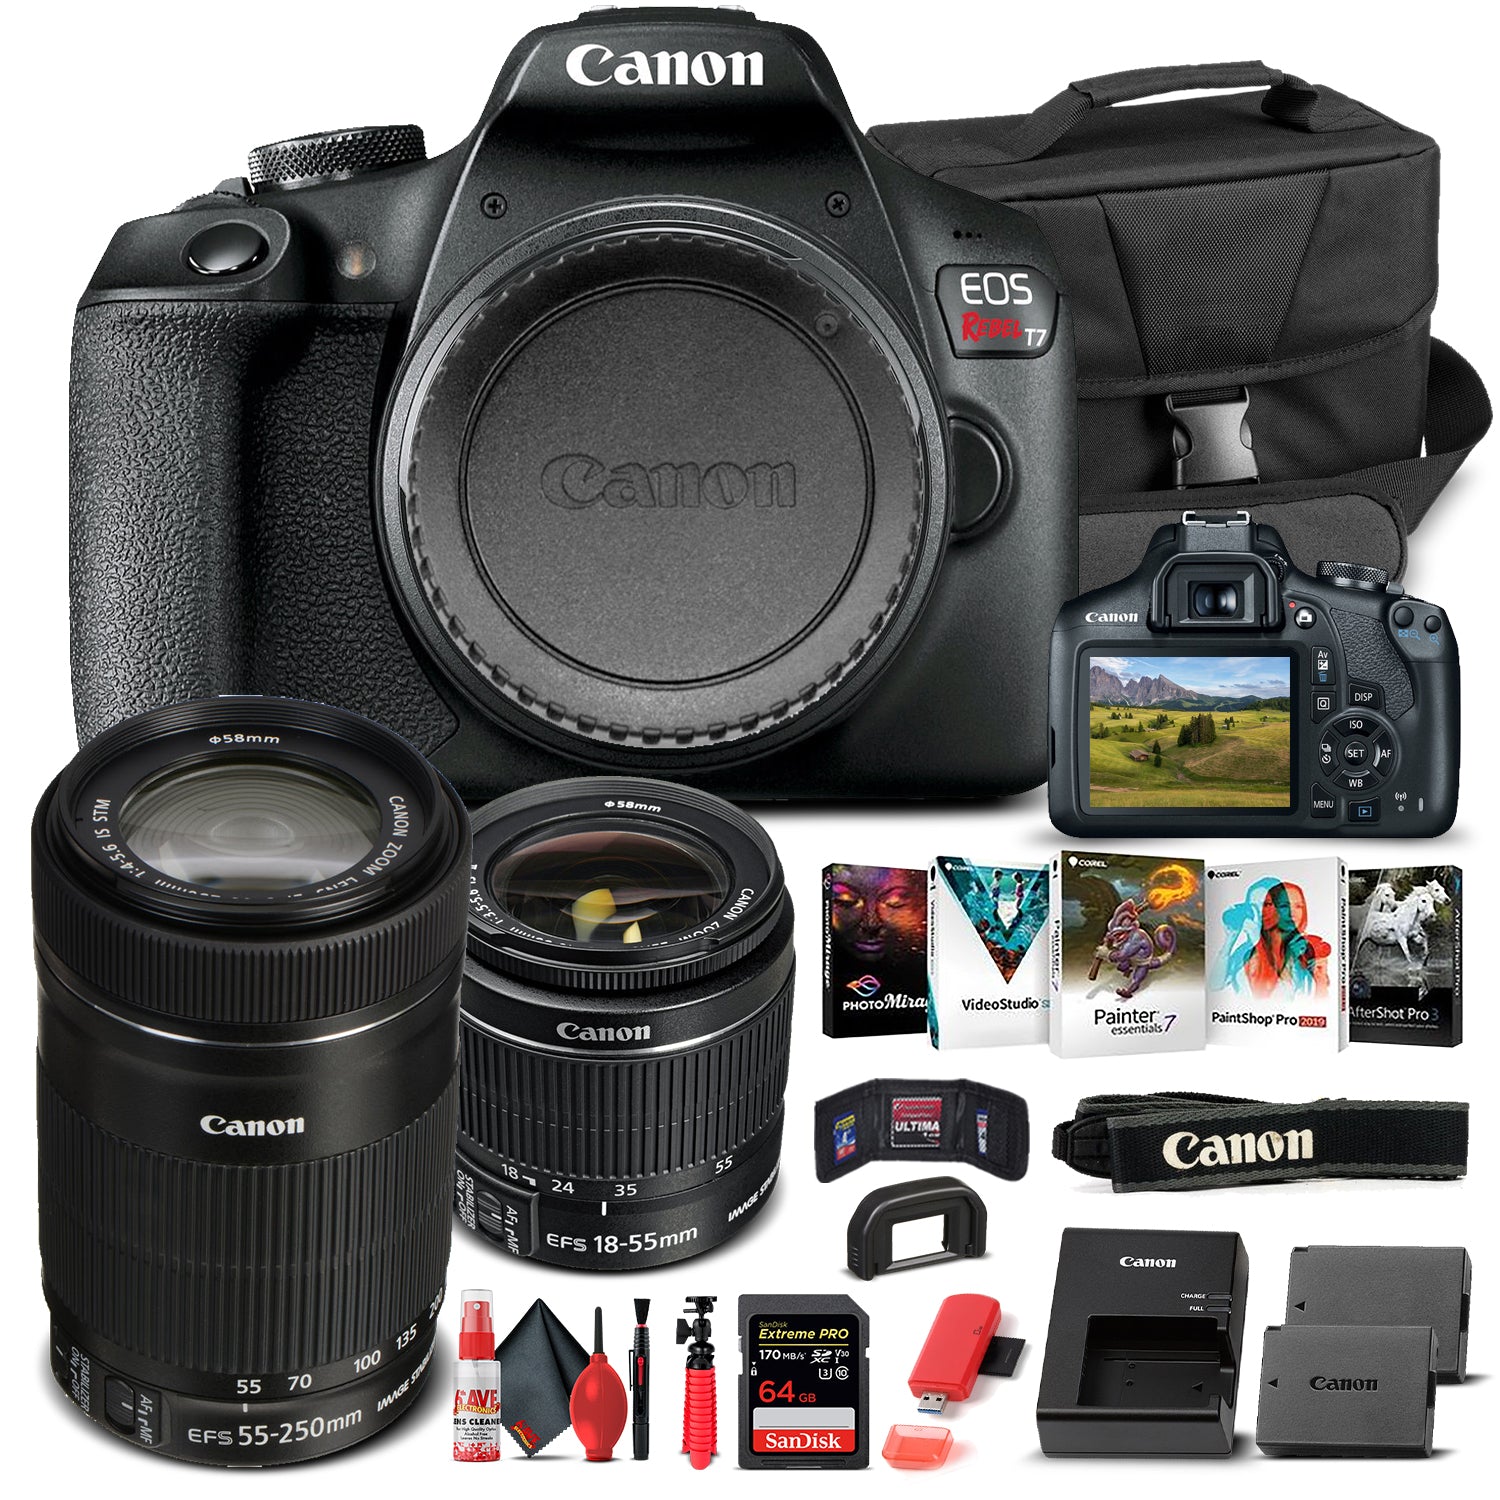 Canon EOS Rebel T7 Camera W/ 18-55mm and EF-S 55-250mm Lens  - Basic Bundle